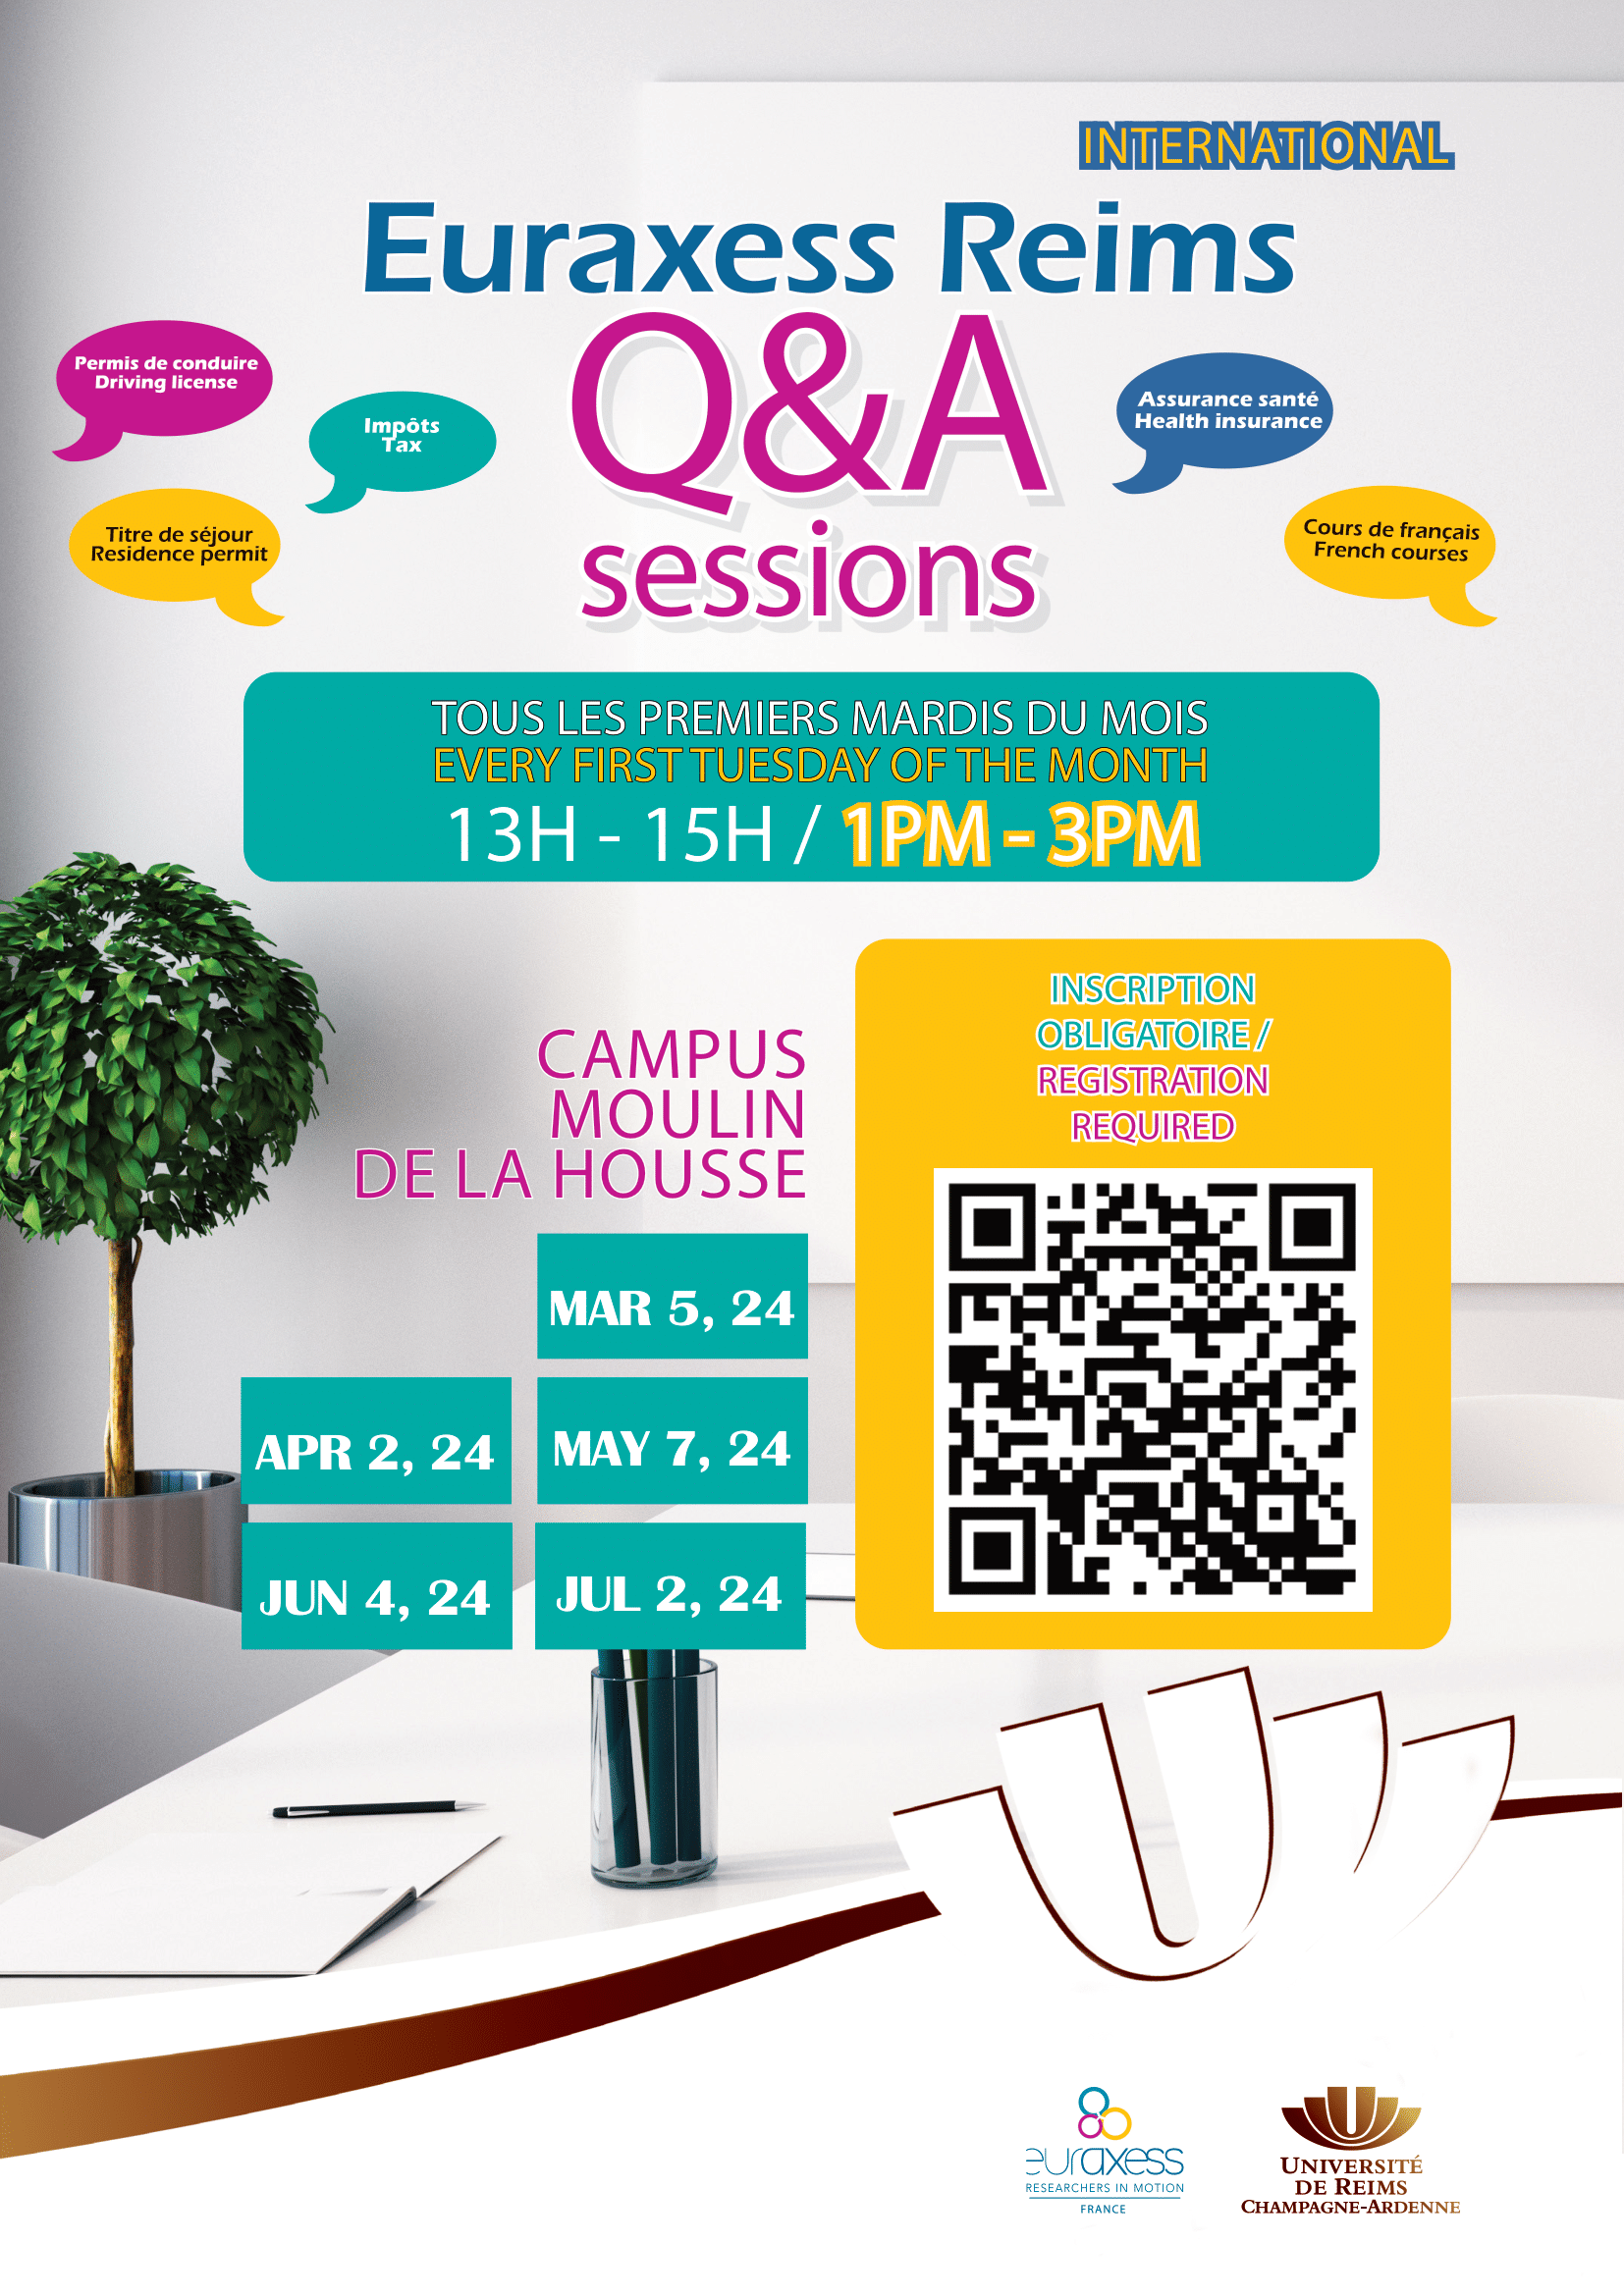 EURAXESS REIMS Q&A SESSIONS 